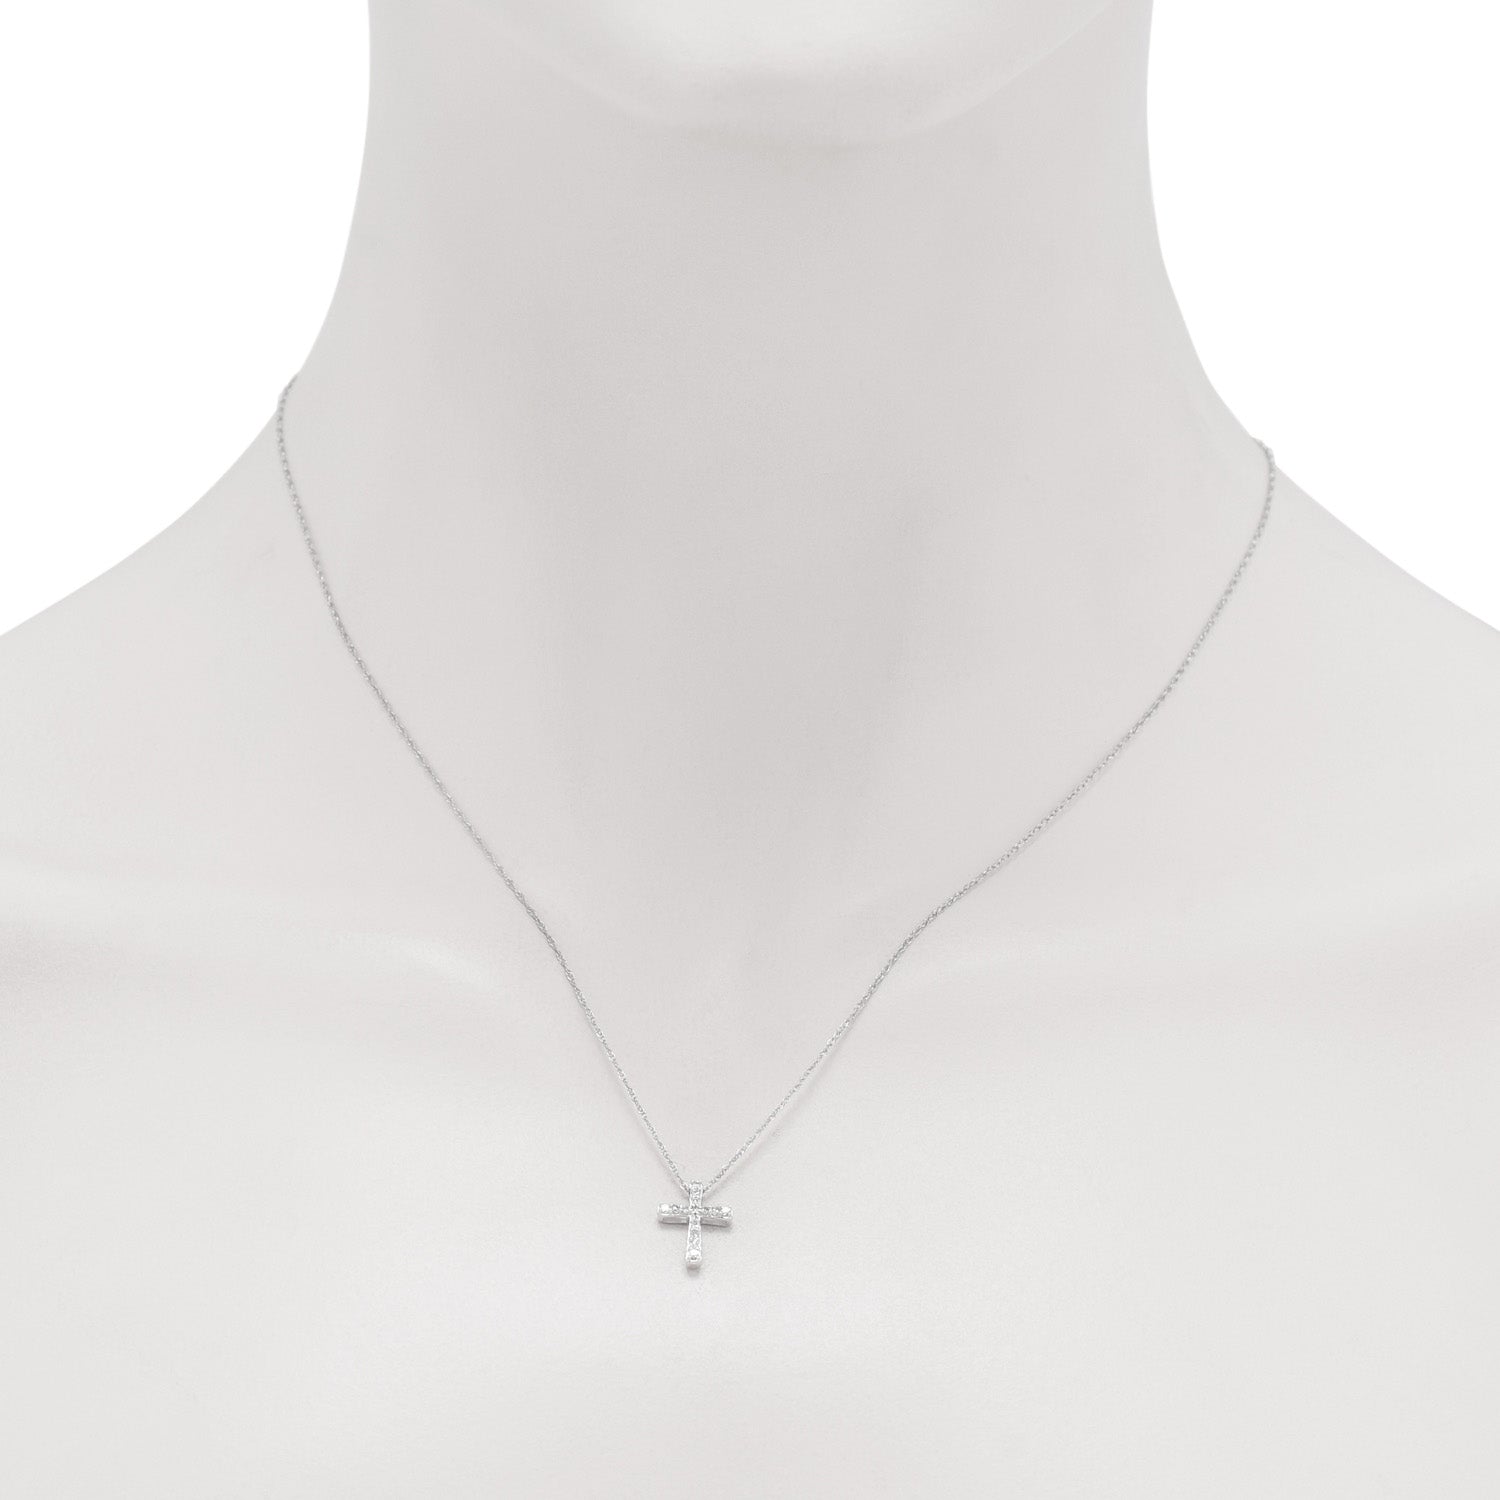 Diamond Cross Necklace in 10kt White Gold (1/10ct tw)